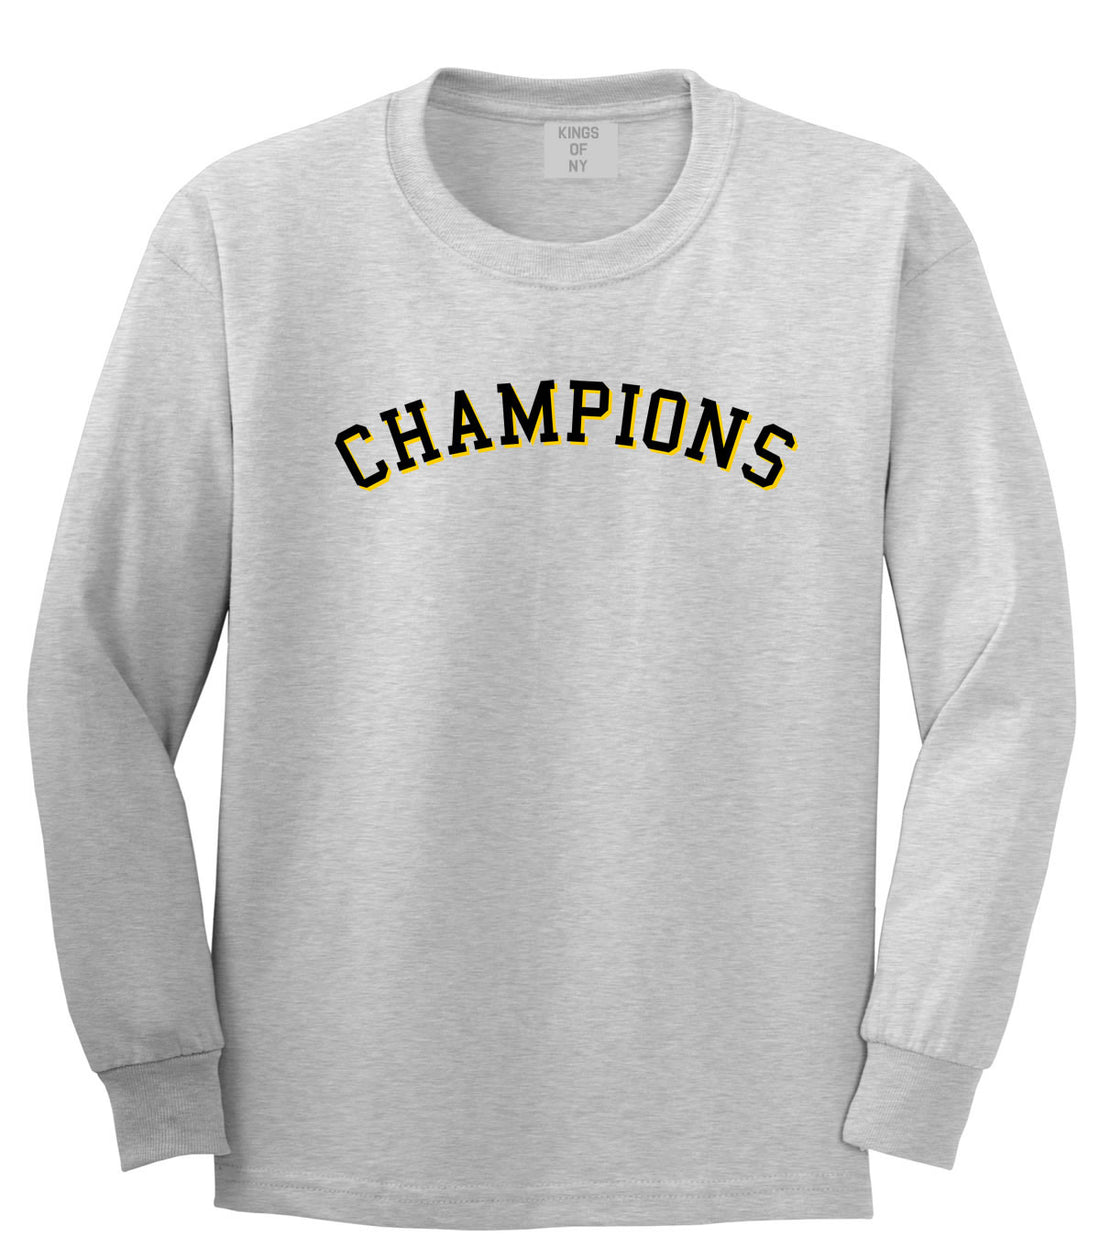 Champions Long Sleeve T-Shirt in Grey by Kings Of NY